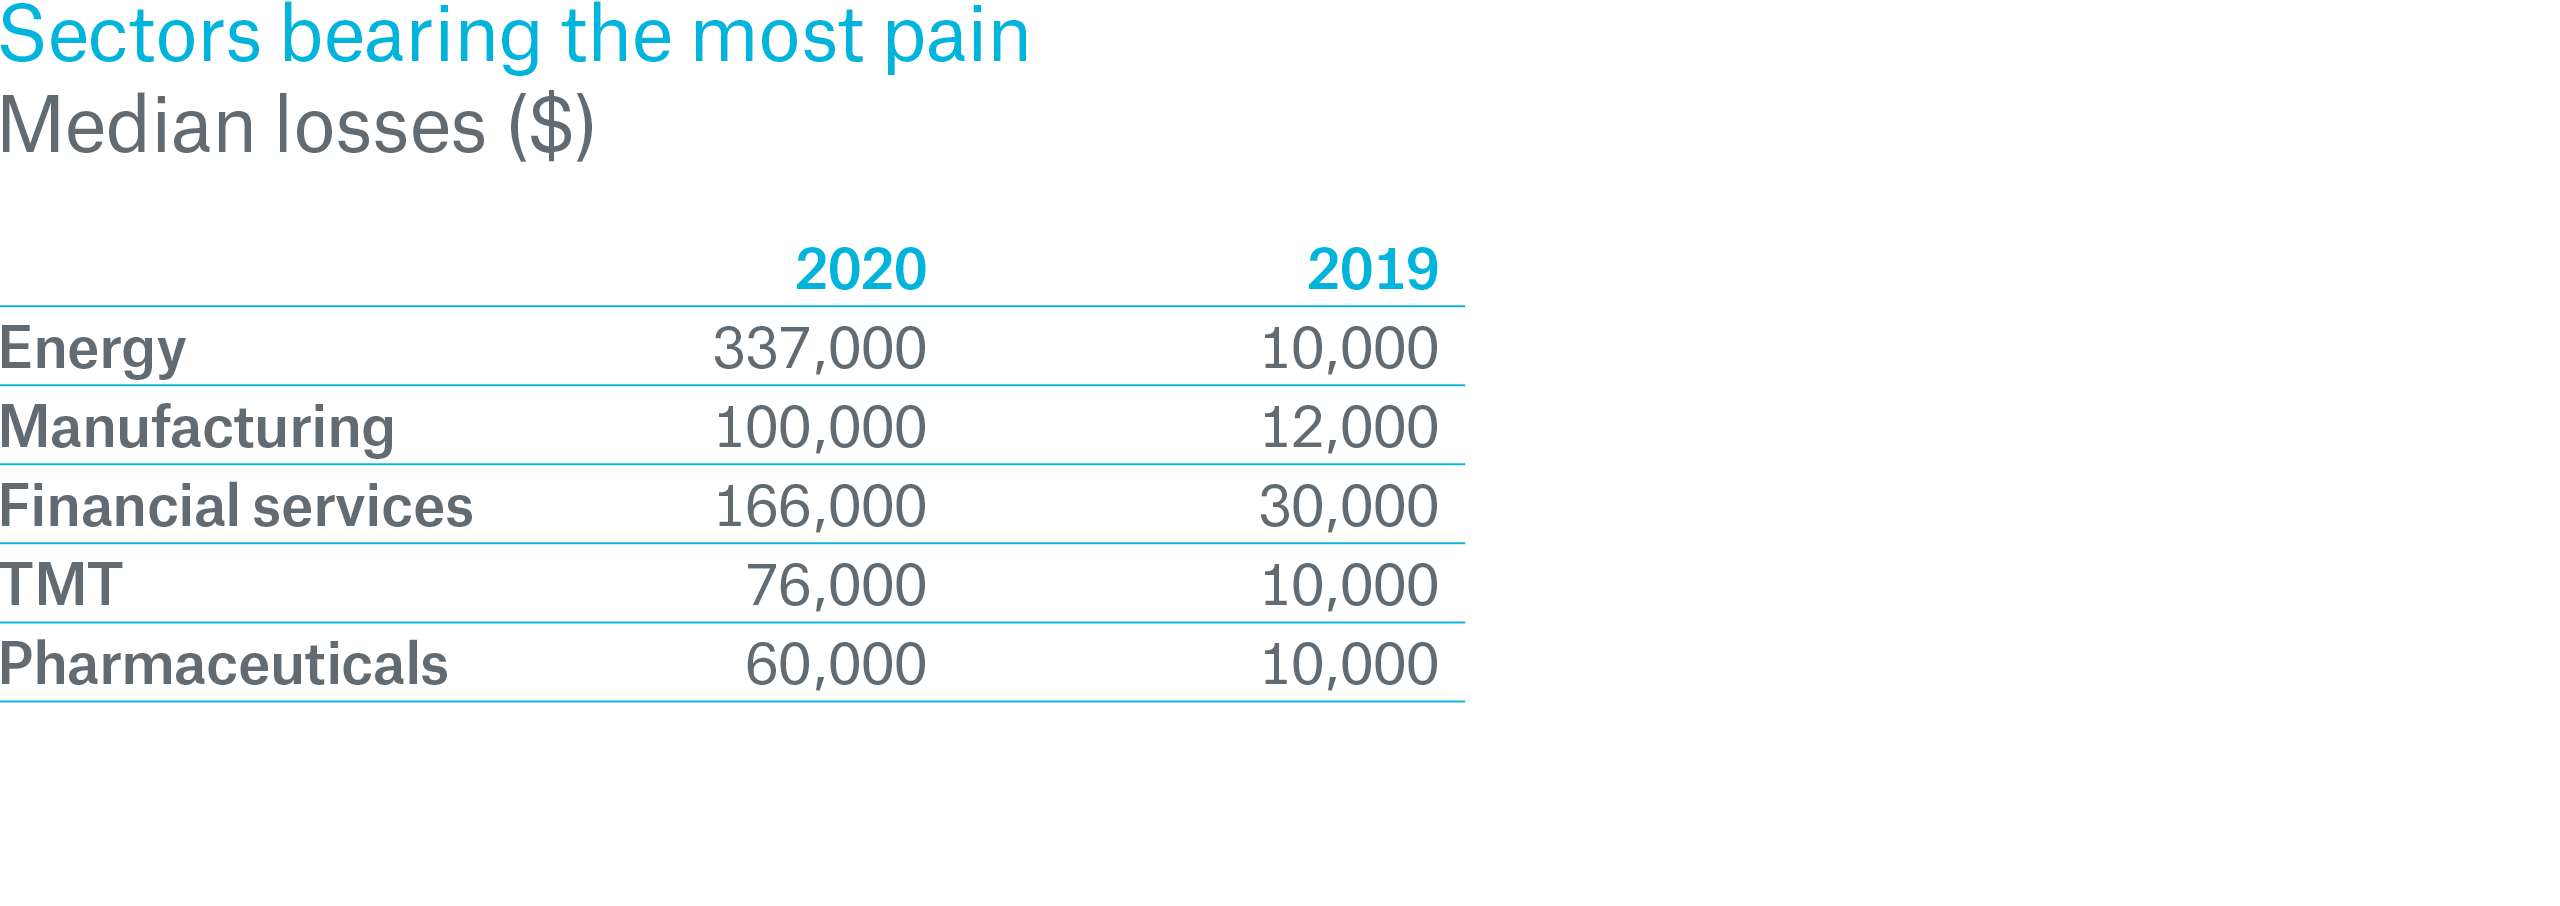 Sectors bearing the most pain - Median losses ($)